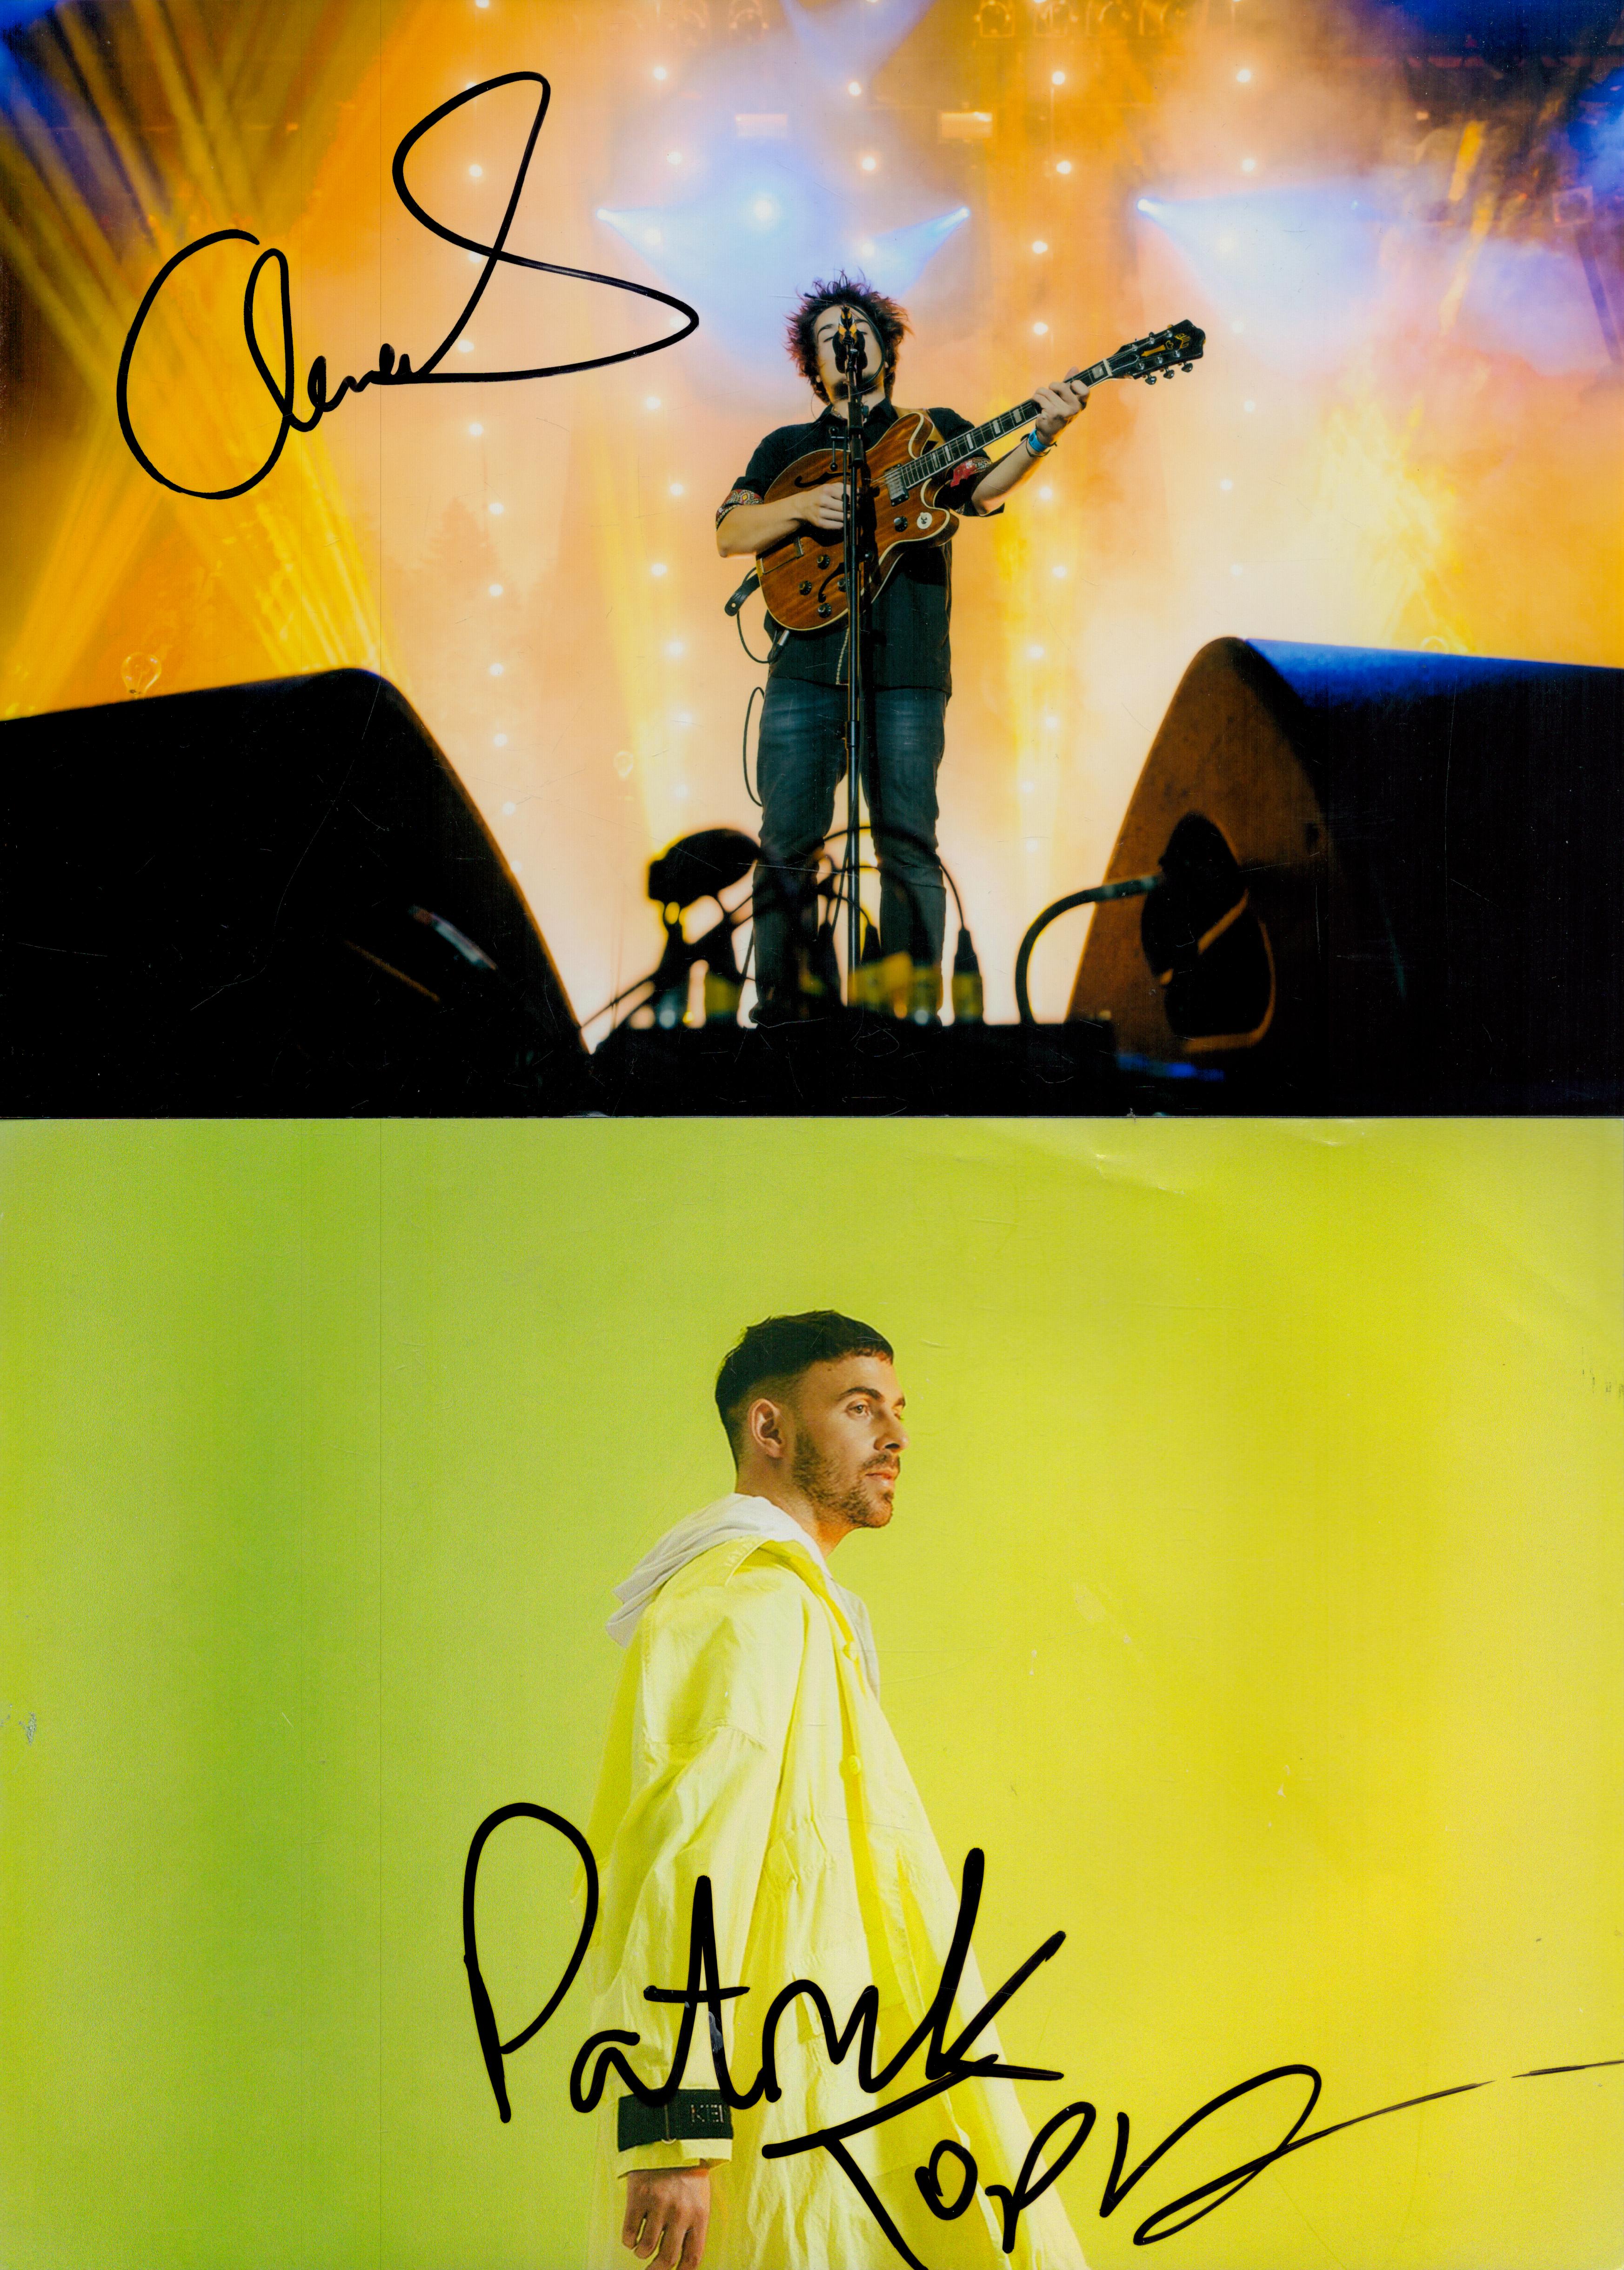 Music 5 x Collection. Signed signatures such as Milky Chance. David Frow. Patrick Topping 12x8 - Image 2 of 3